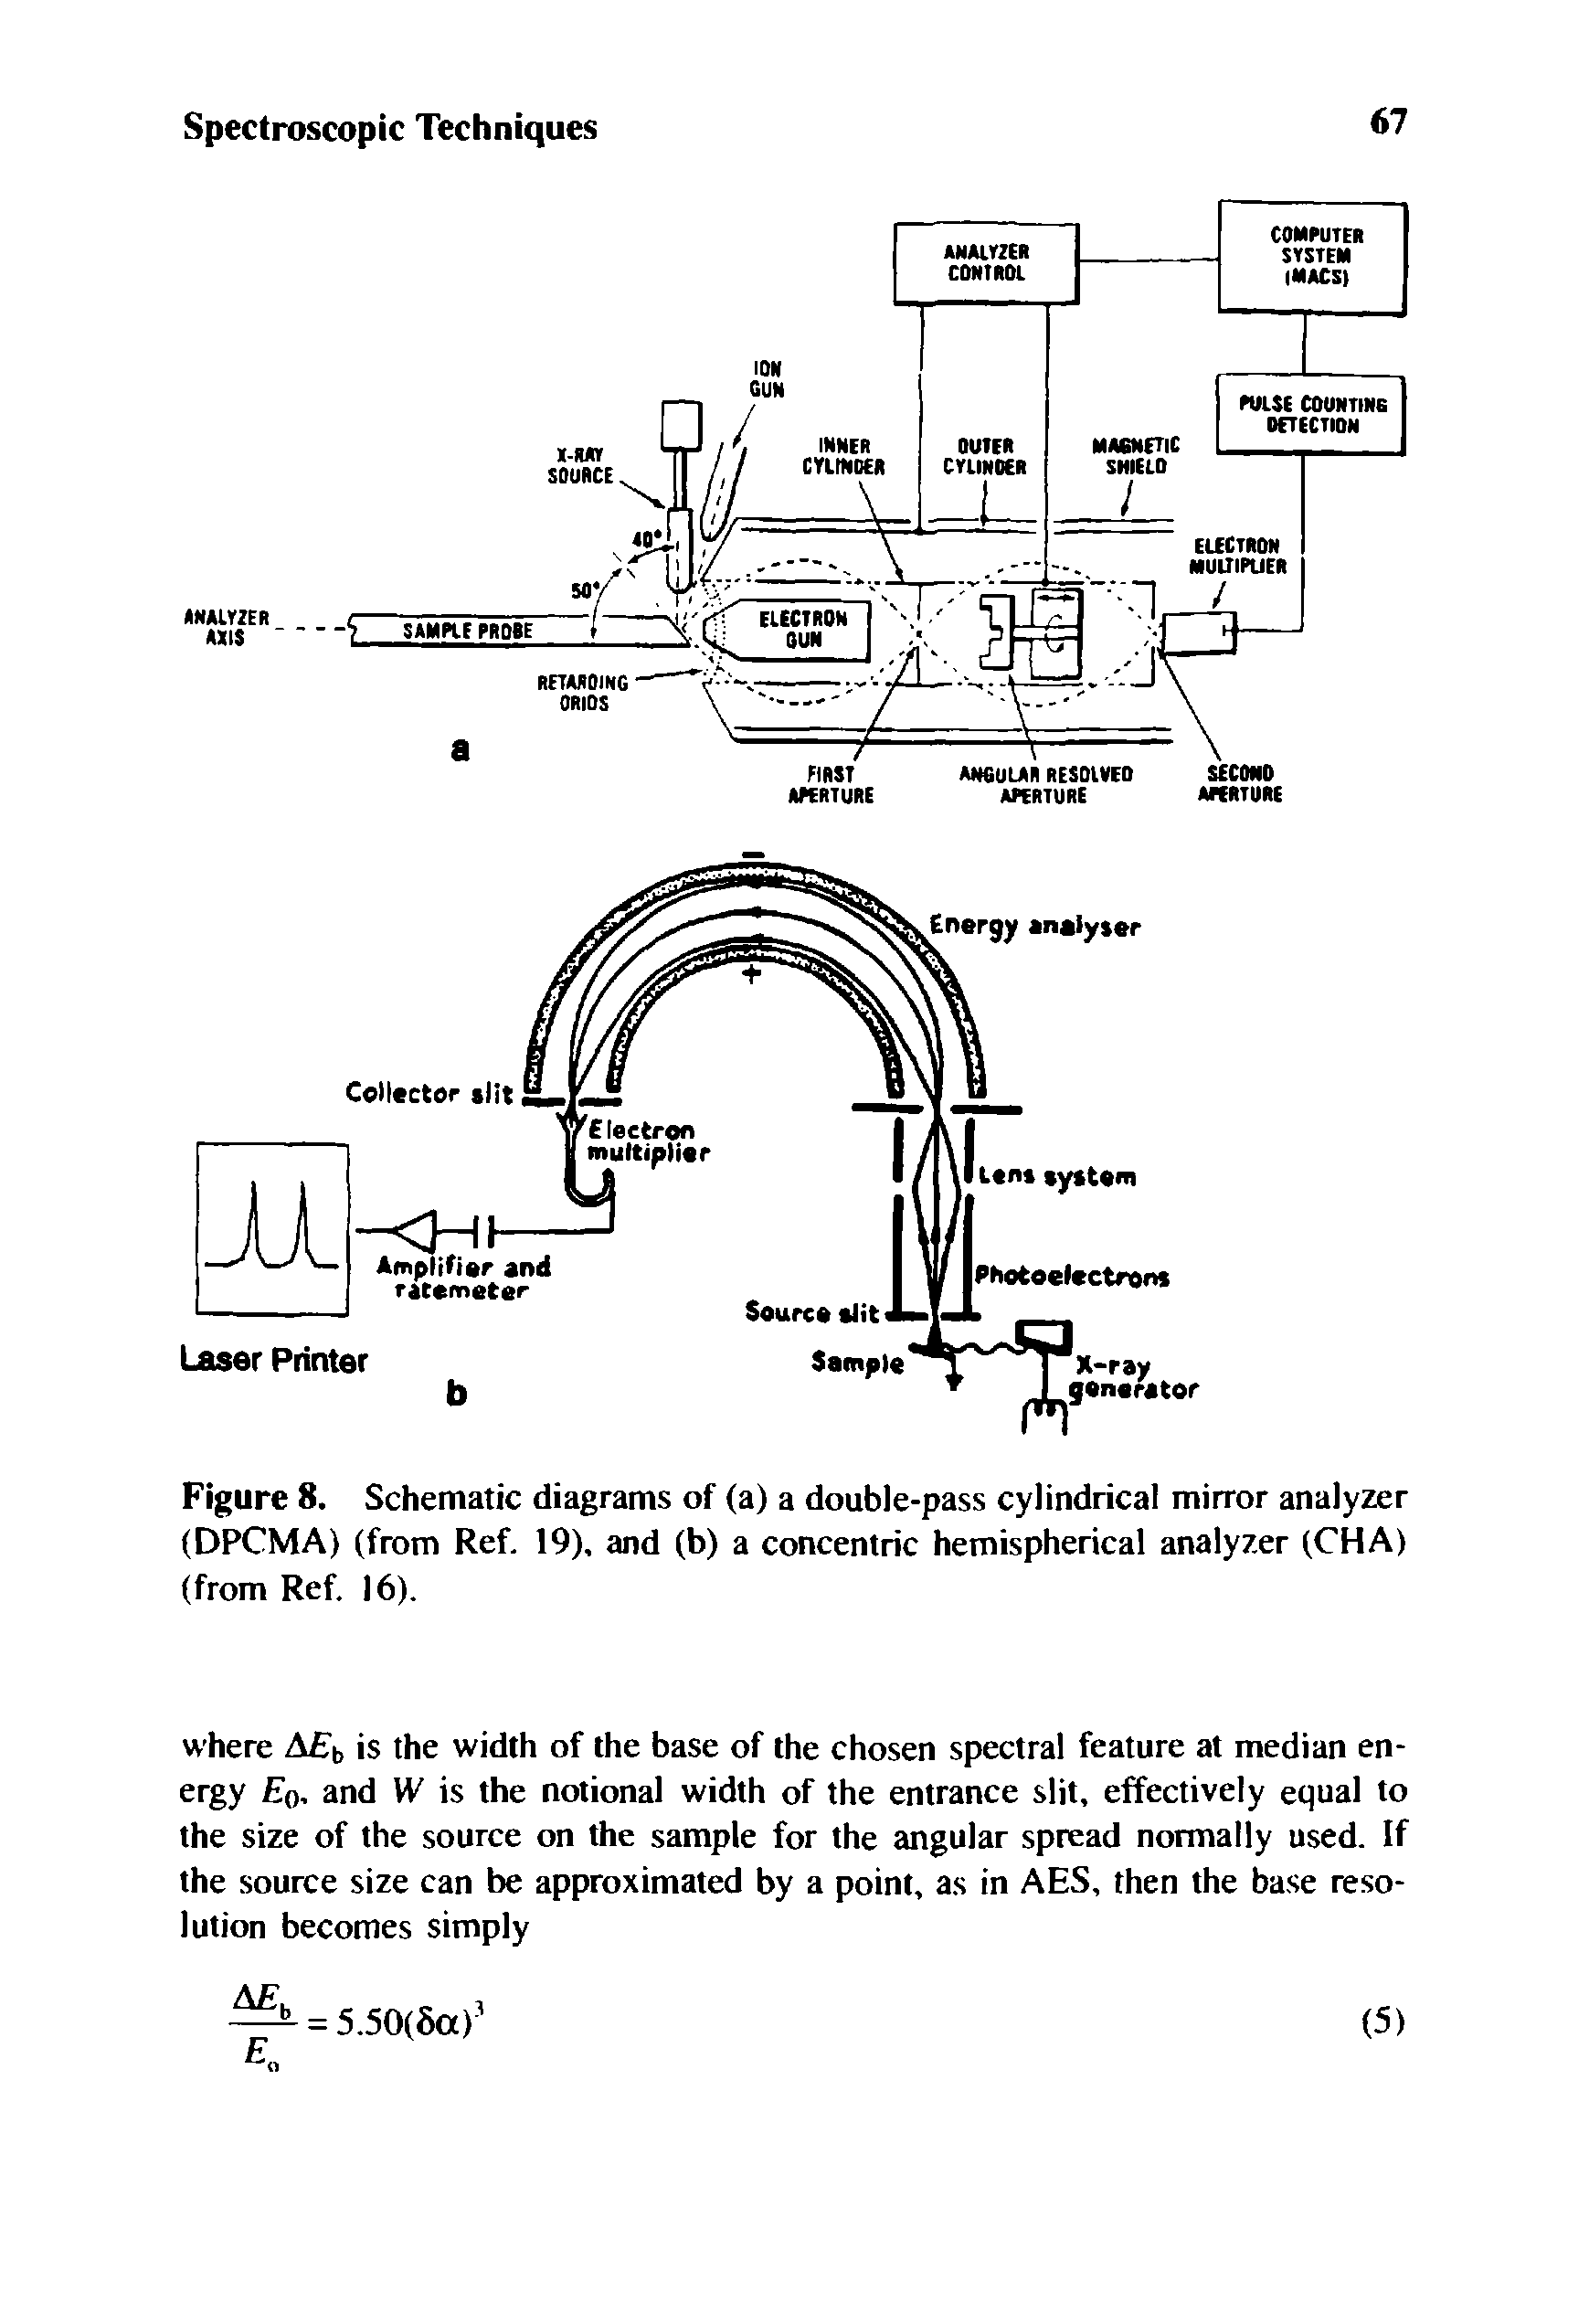 Figure 8. Schematic diagrams of (a) a double-pass cylindrical mirror analyzer (DPCMA) (from Ref. 19), and (b) a concentric hemispherical analyzer (CHA) (from Ref. 16).